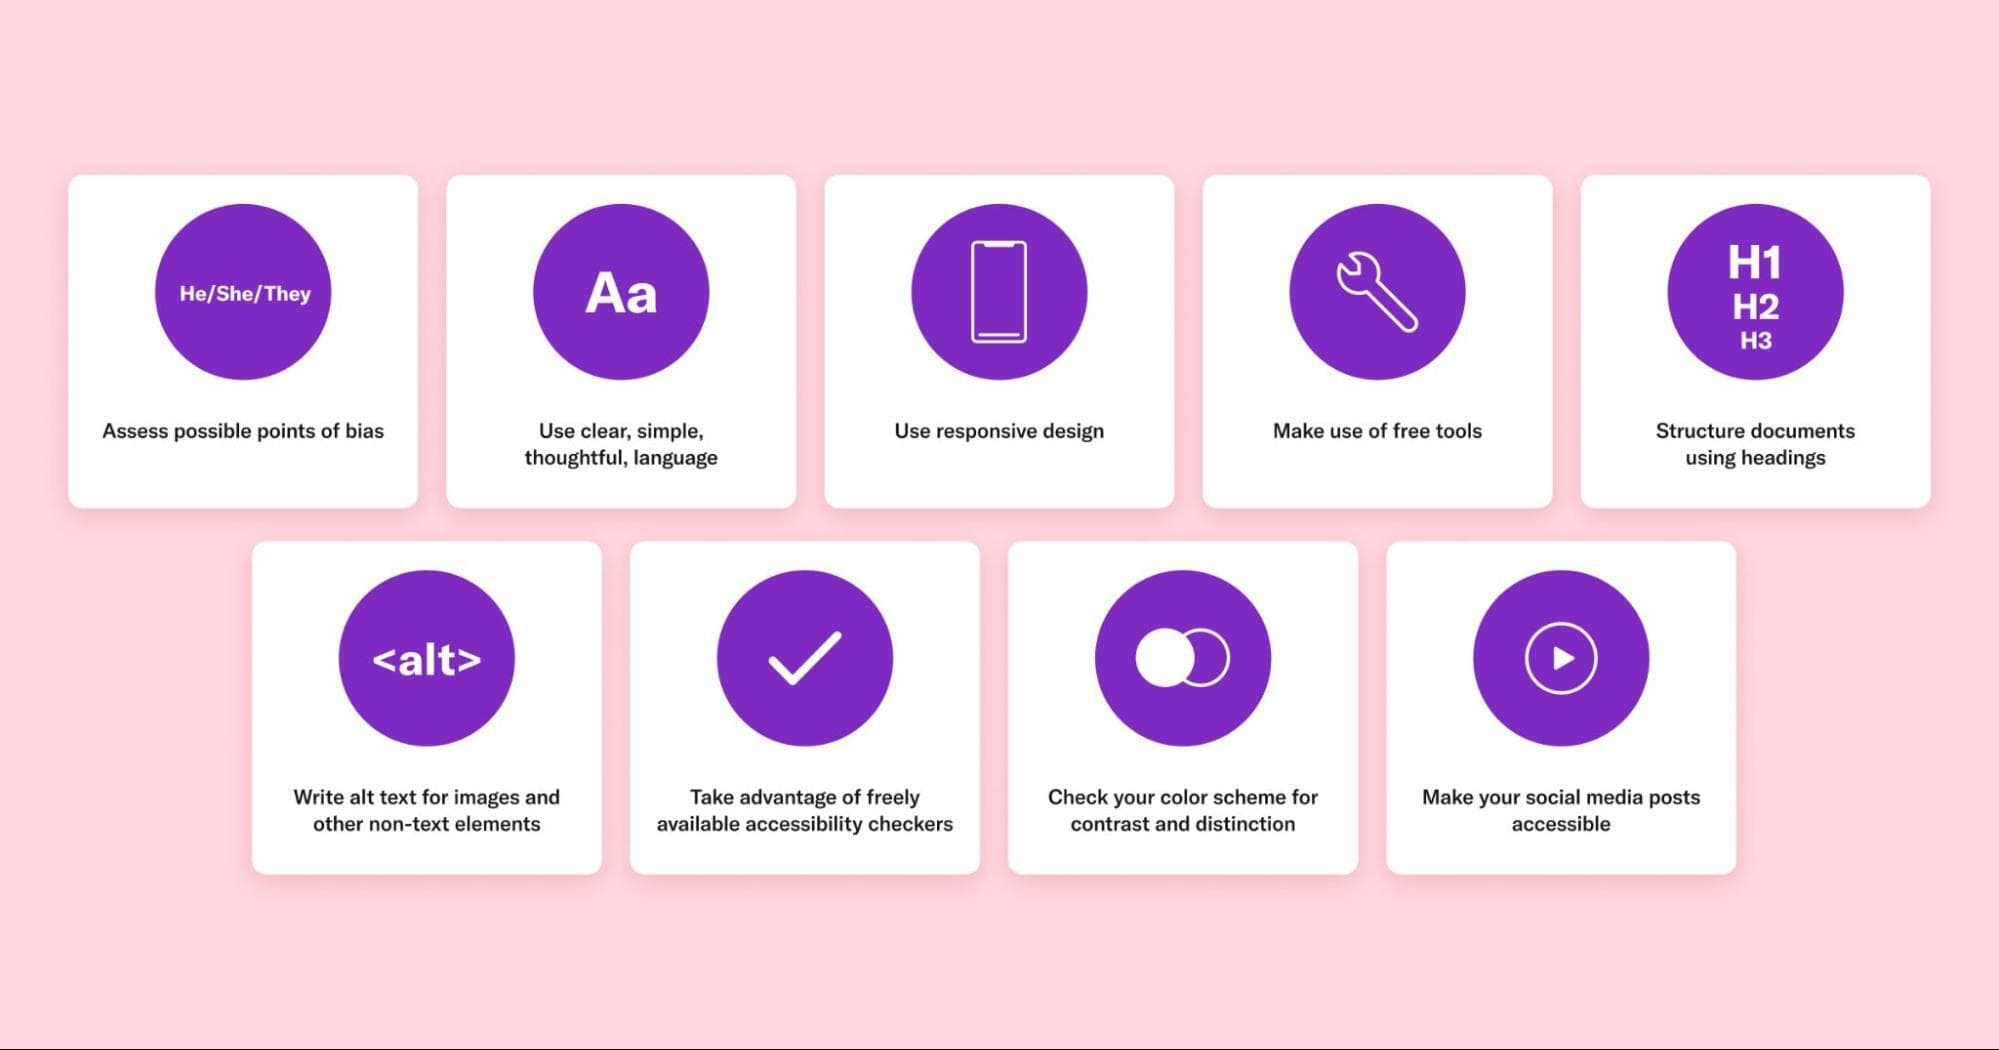 Purple icons in white boxes on pink background representing the following nine tips.